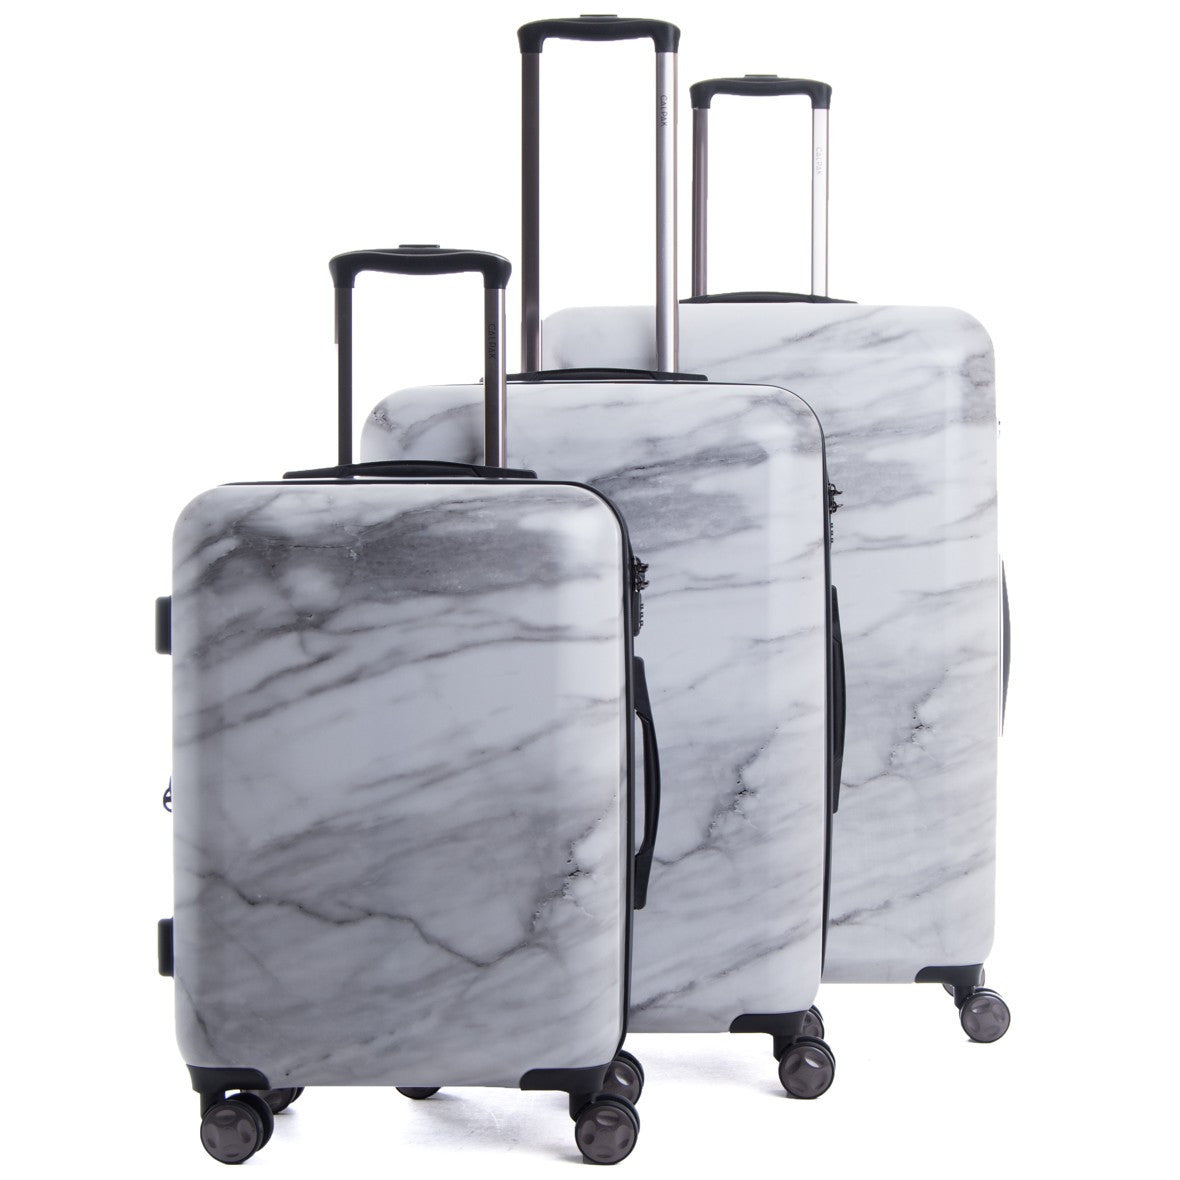 Astyll 3-Piece Luggage Set in Milk Marble